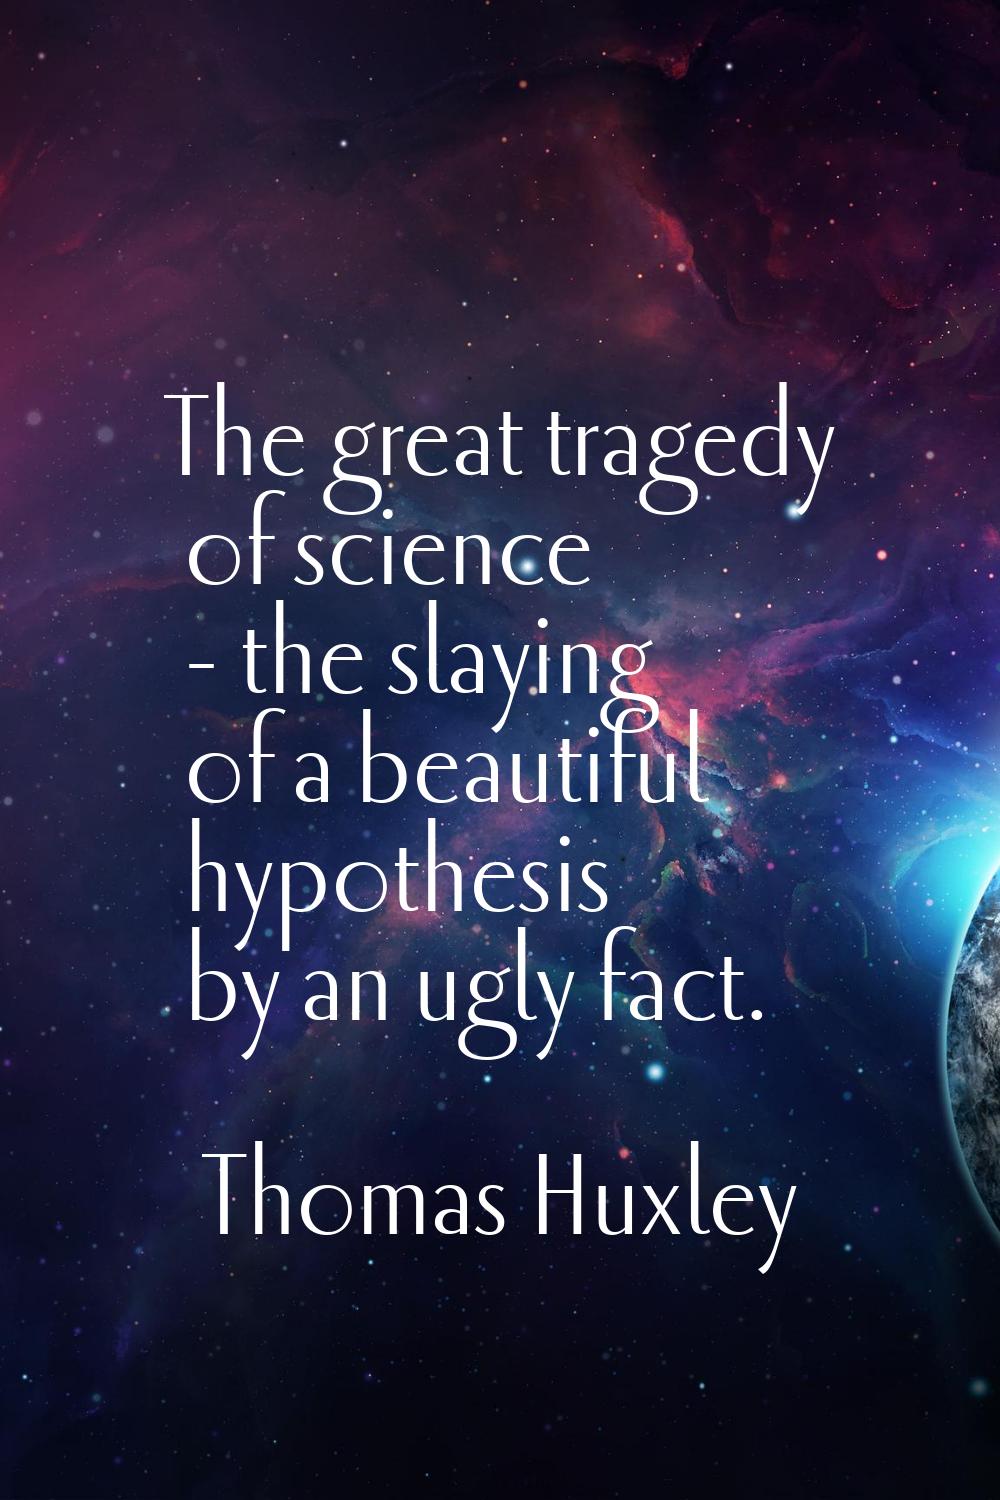 The great tragedy of science - the slaying of a beautiful hypothesis by an ugly fact.